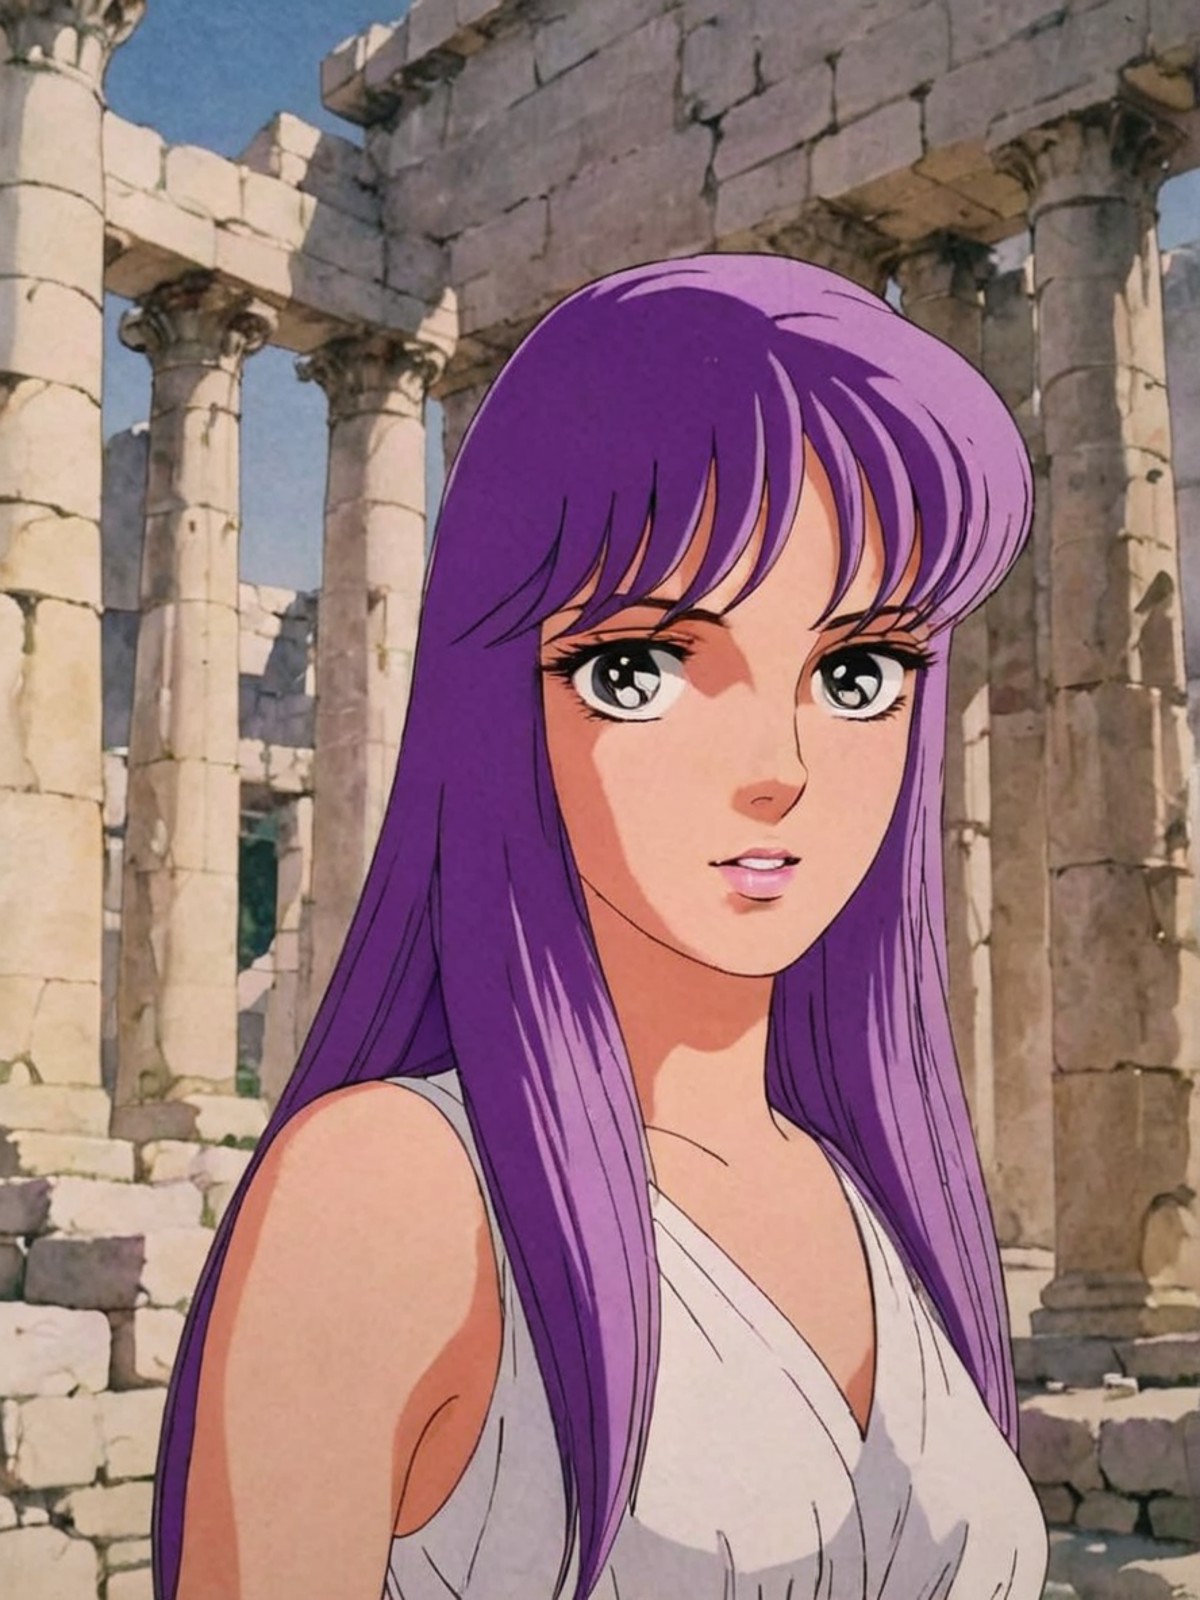 Anime illustration portrait of s40r1k1d0 woman, (in ancient greece ruins)+, purple hair